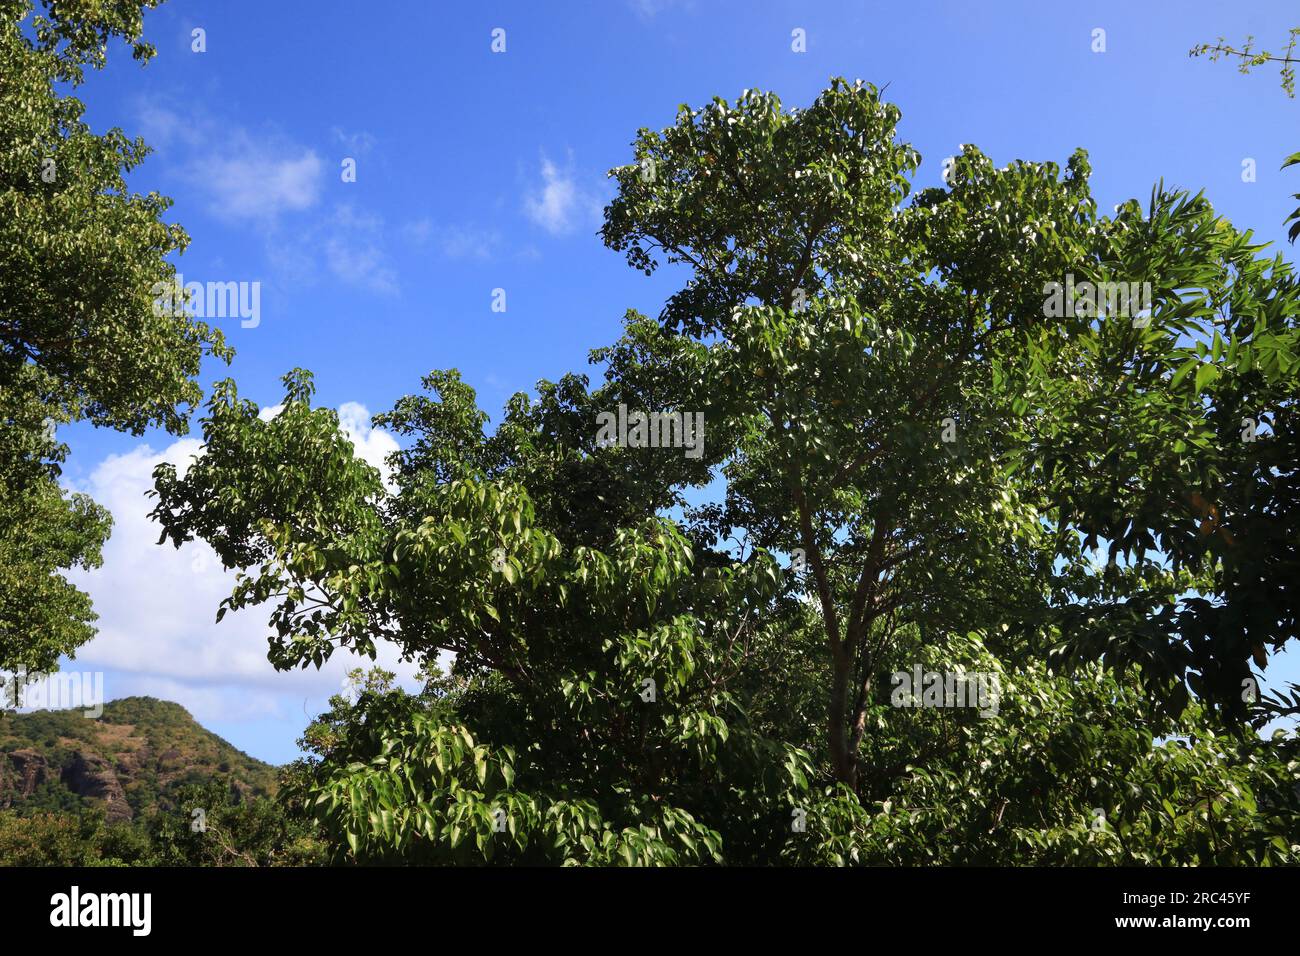 Manchineel tree (Hippomane mancinella) species in the Caribbean. Dangerous toxic tree. All parts of the tree are poisonous or toxic. Stock Photo